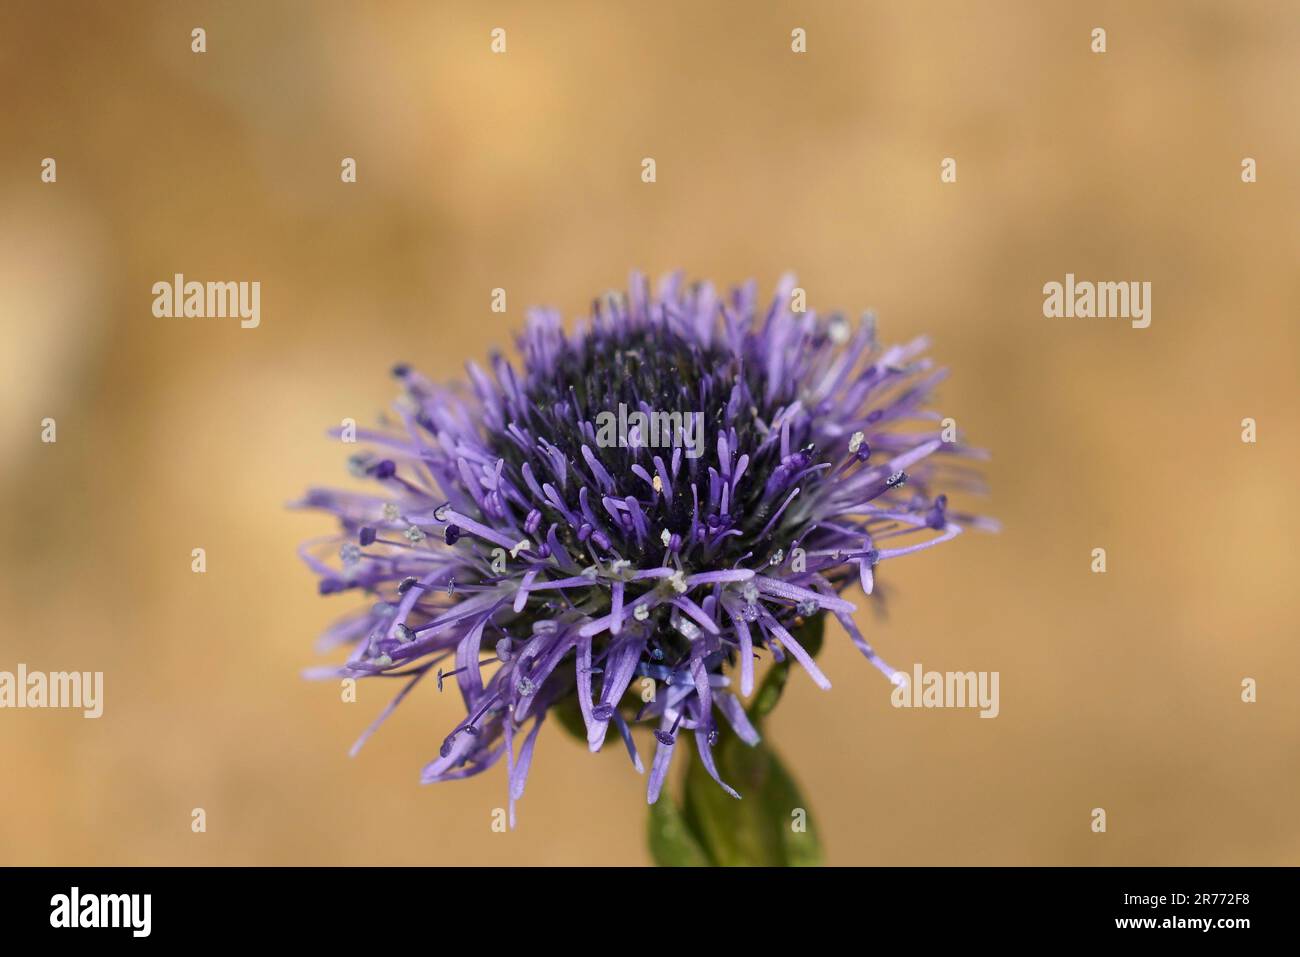 Closeup on the blue flower of the Common globularia Globularia vulgaris against a brown background Stock Photo